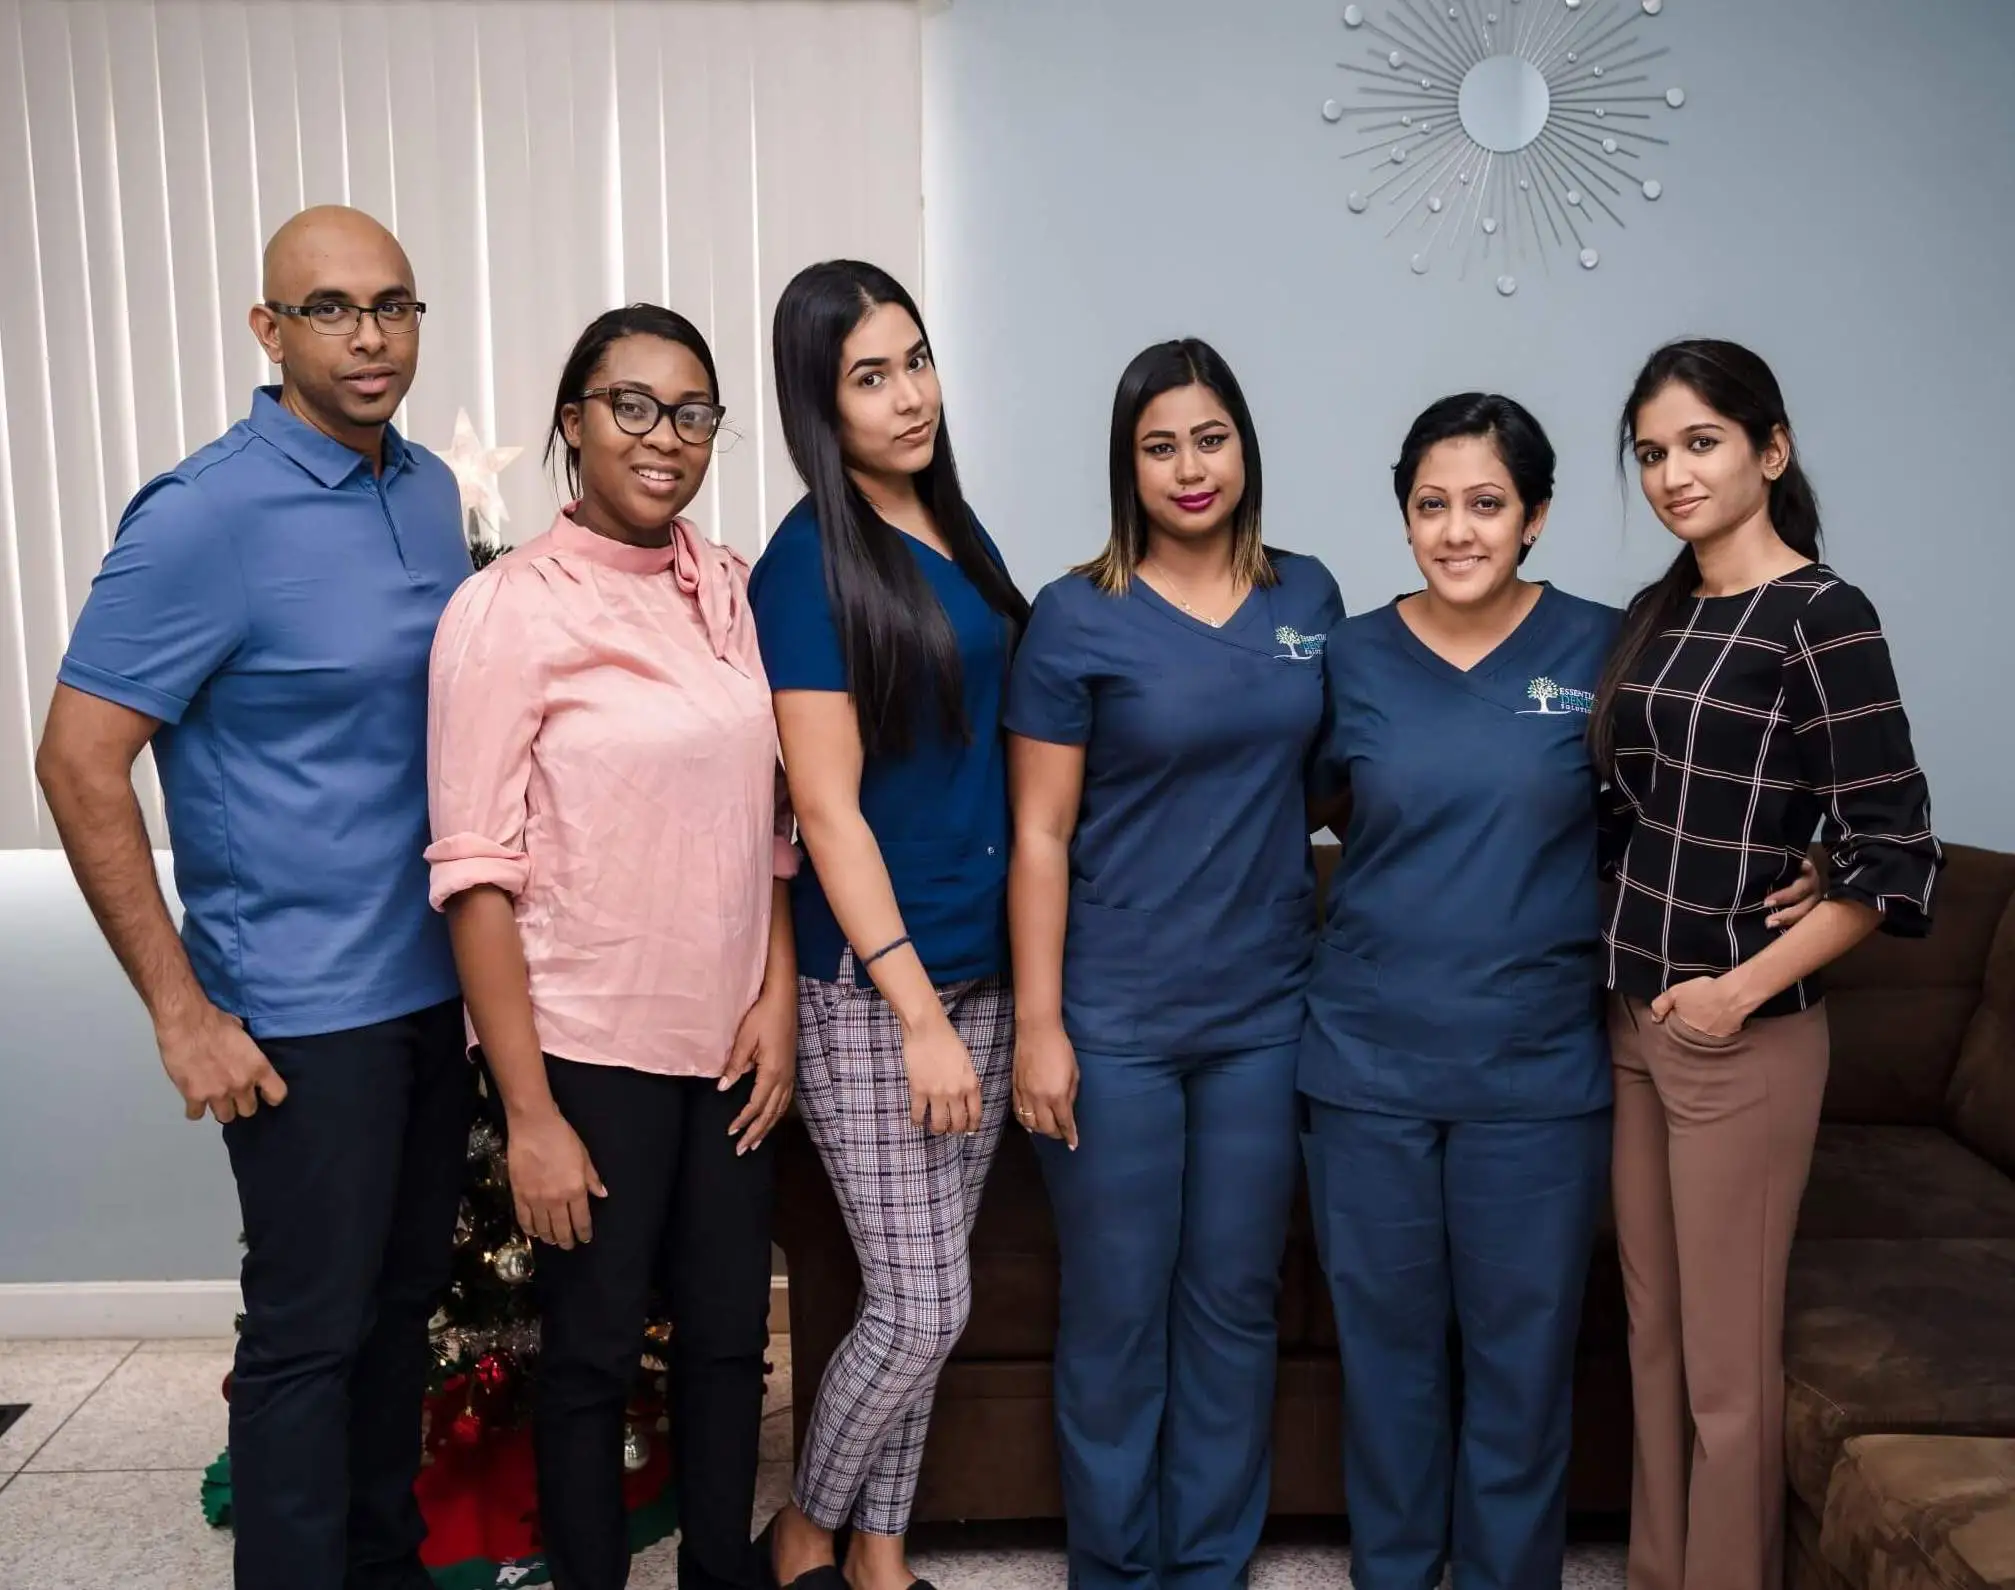 Four members of staff from Essential Dental